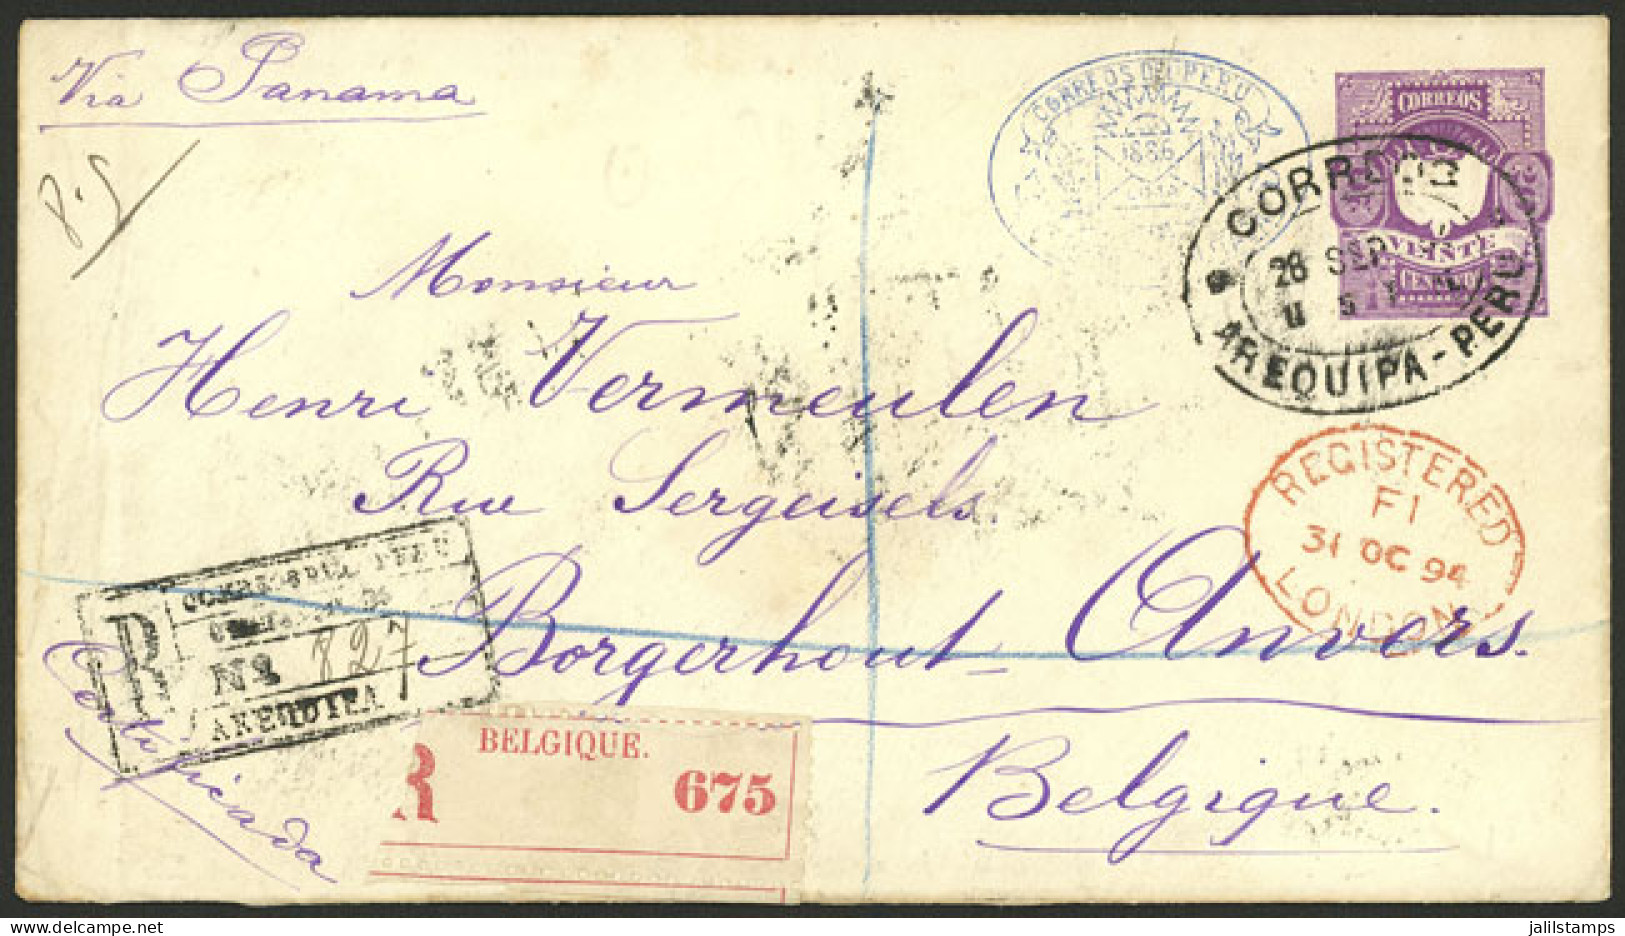 PERU: 20c. Stationery Envelope + Additional 1c. On Back, Sent By Registered Mail From Arequipa To Belgium On 28/SE/1894, - Peru